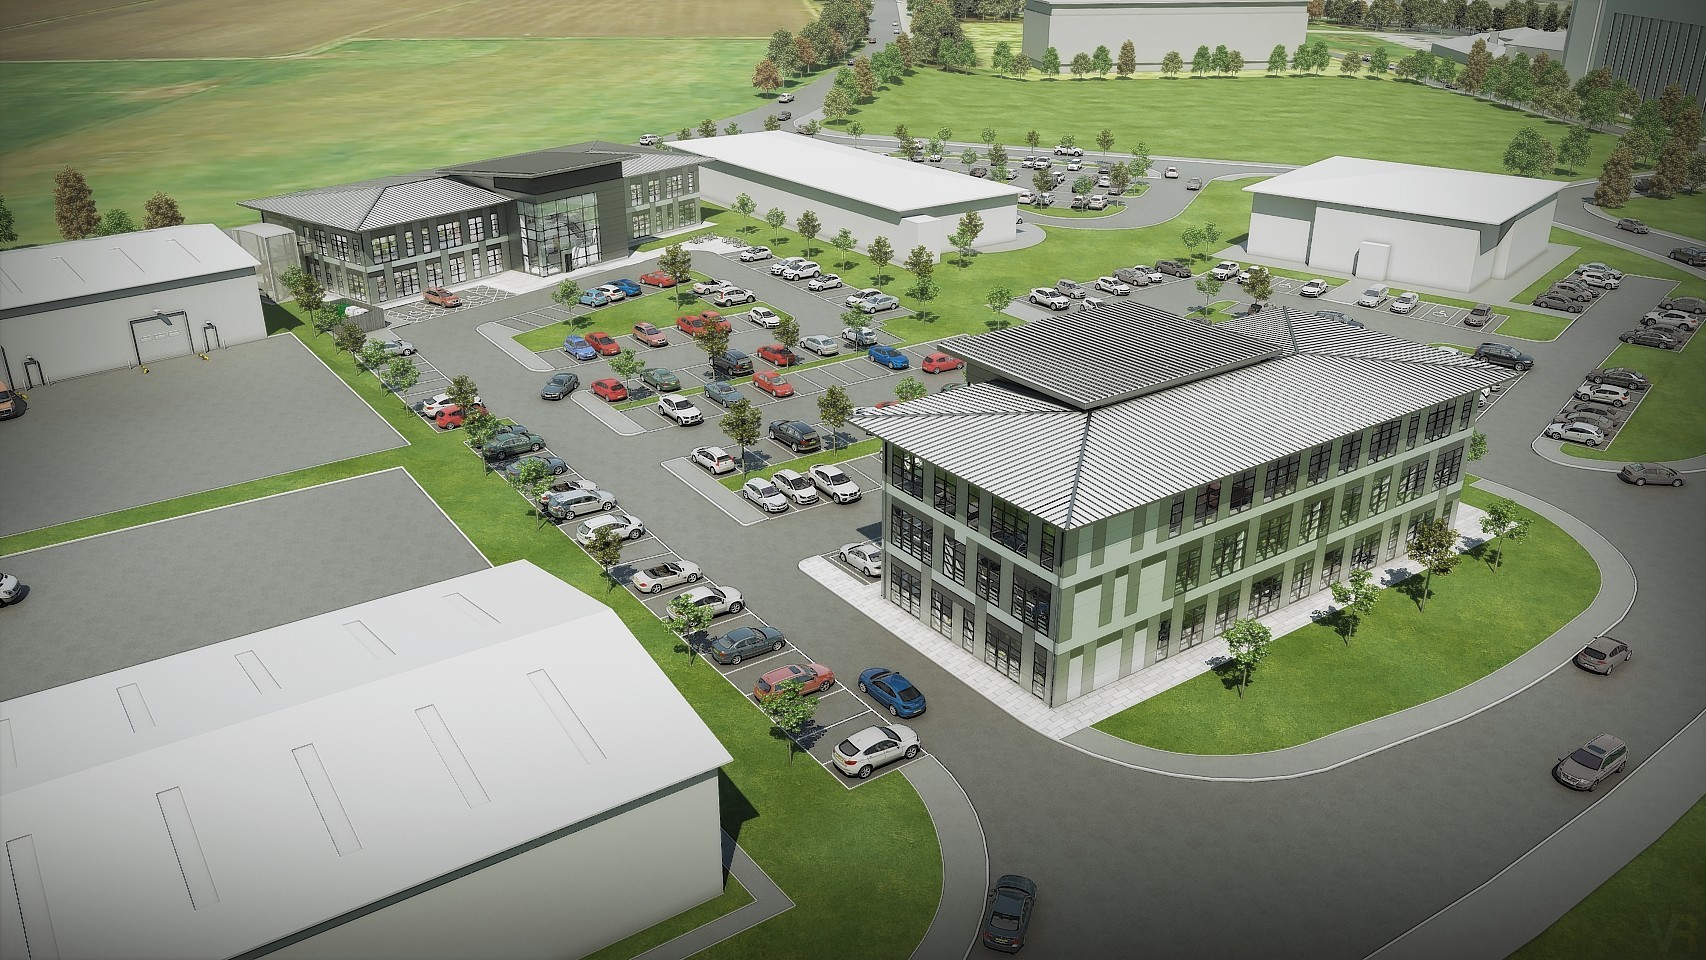 Plans for ABZ Business Park were launched in August 2011